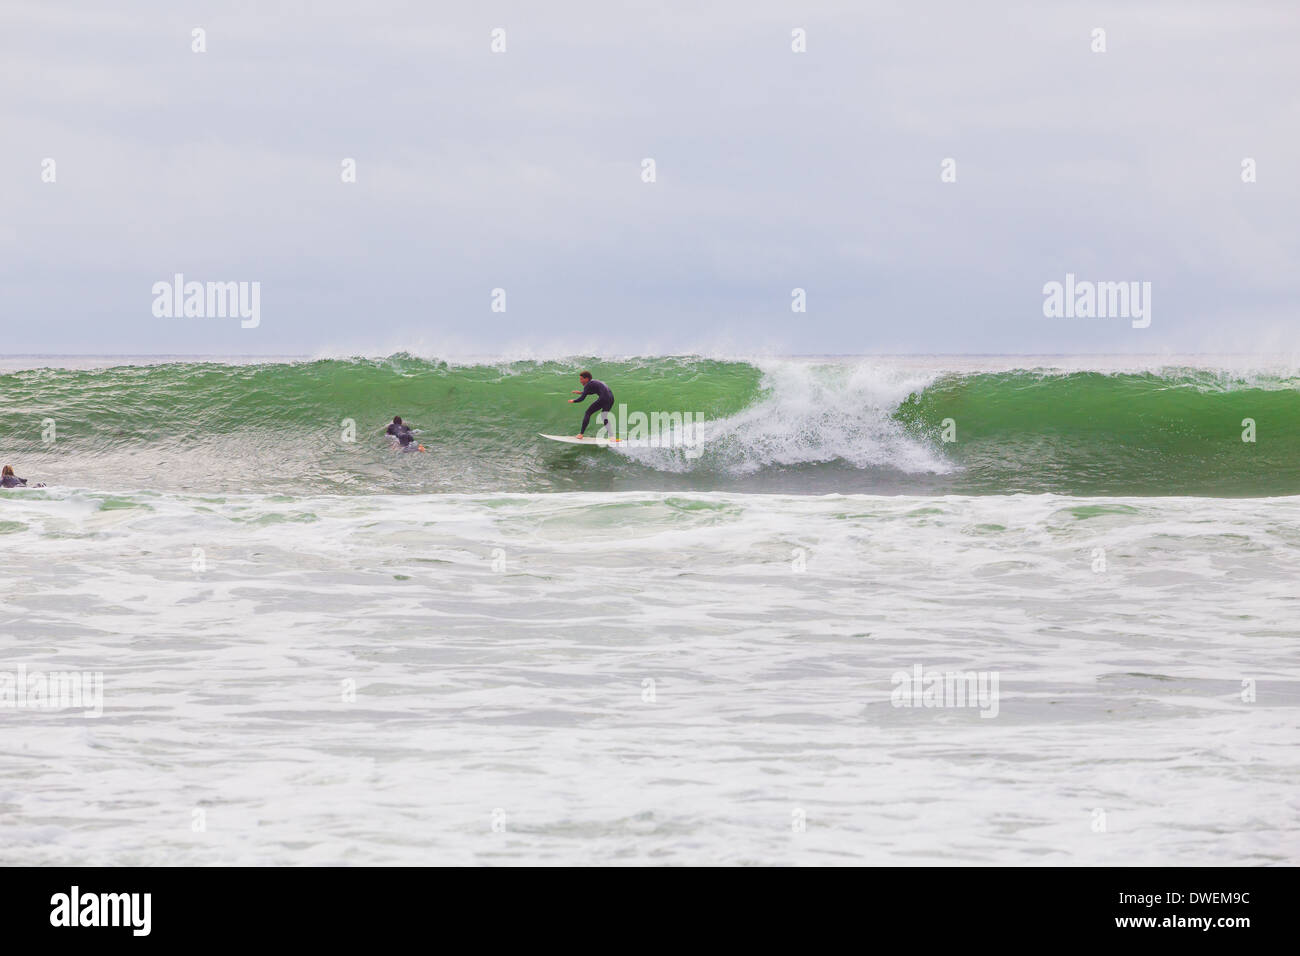 La Jolla, CA - January 30, 2014: Unknown surfer riding a big wave during a surf session in La Jolla California. Stock Photo